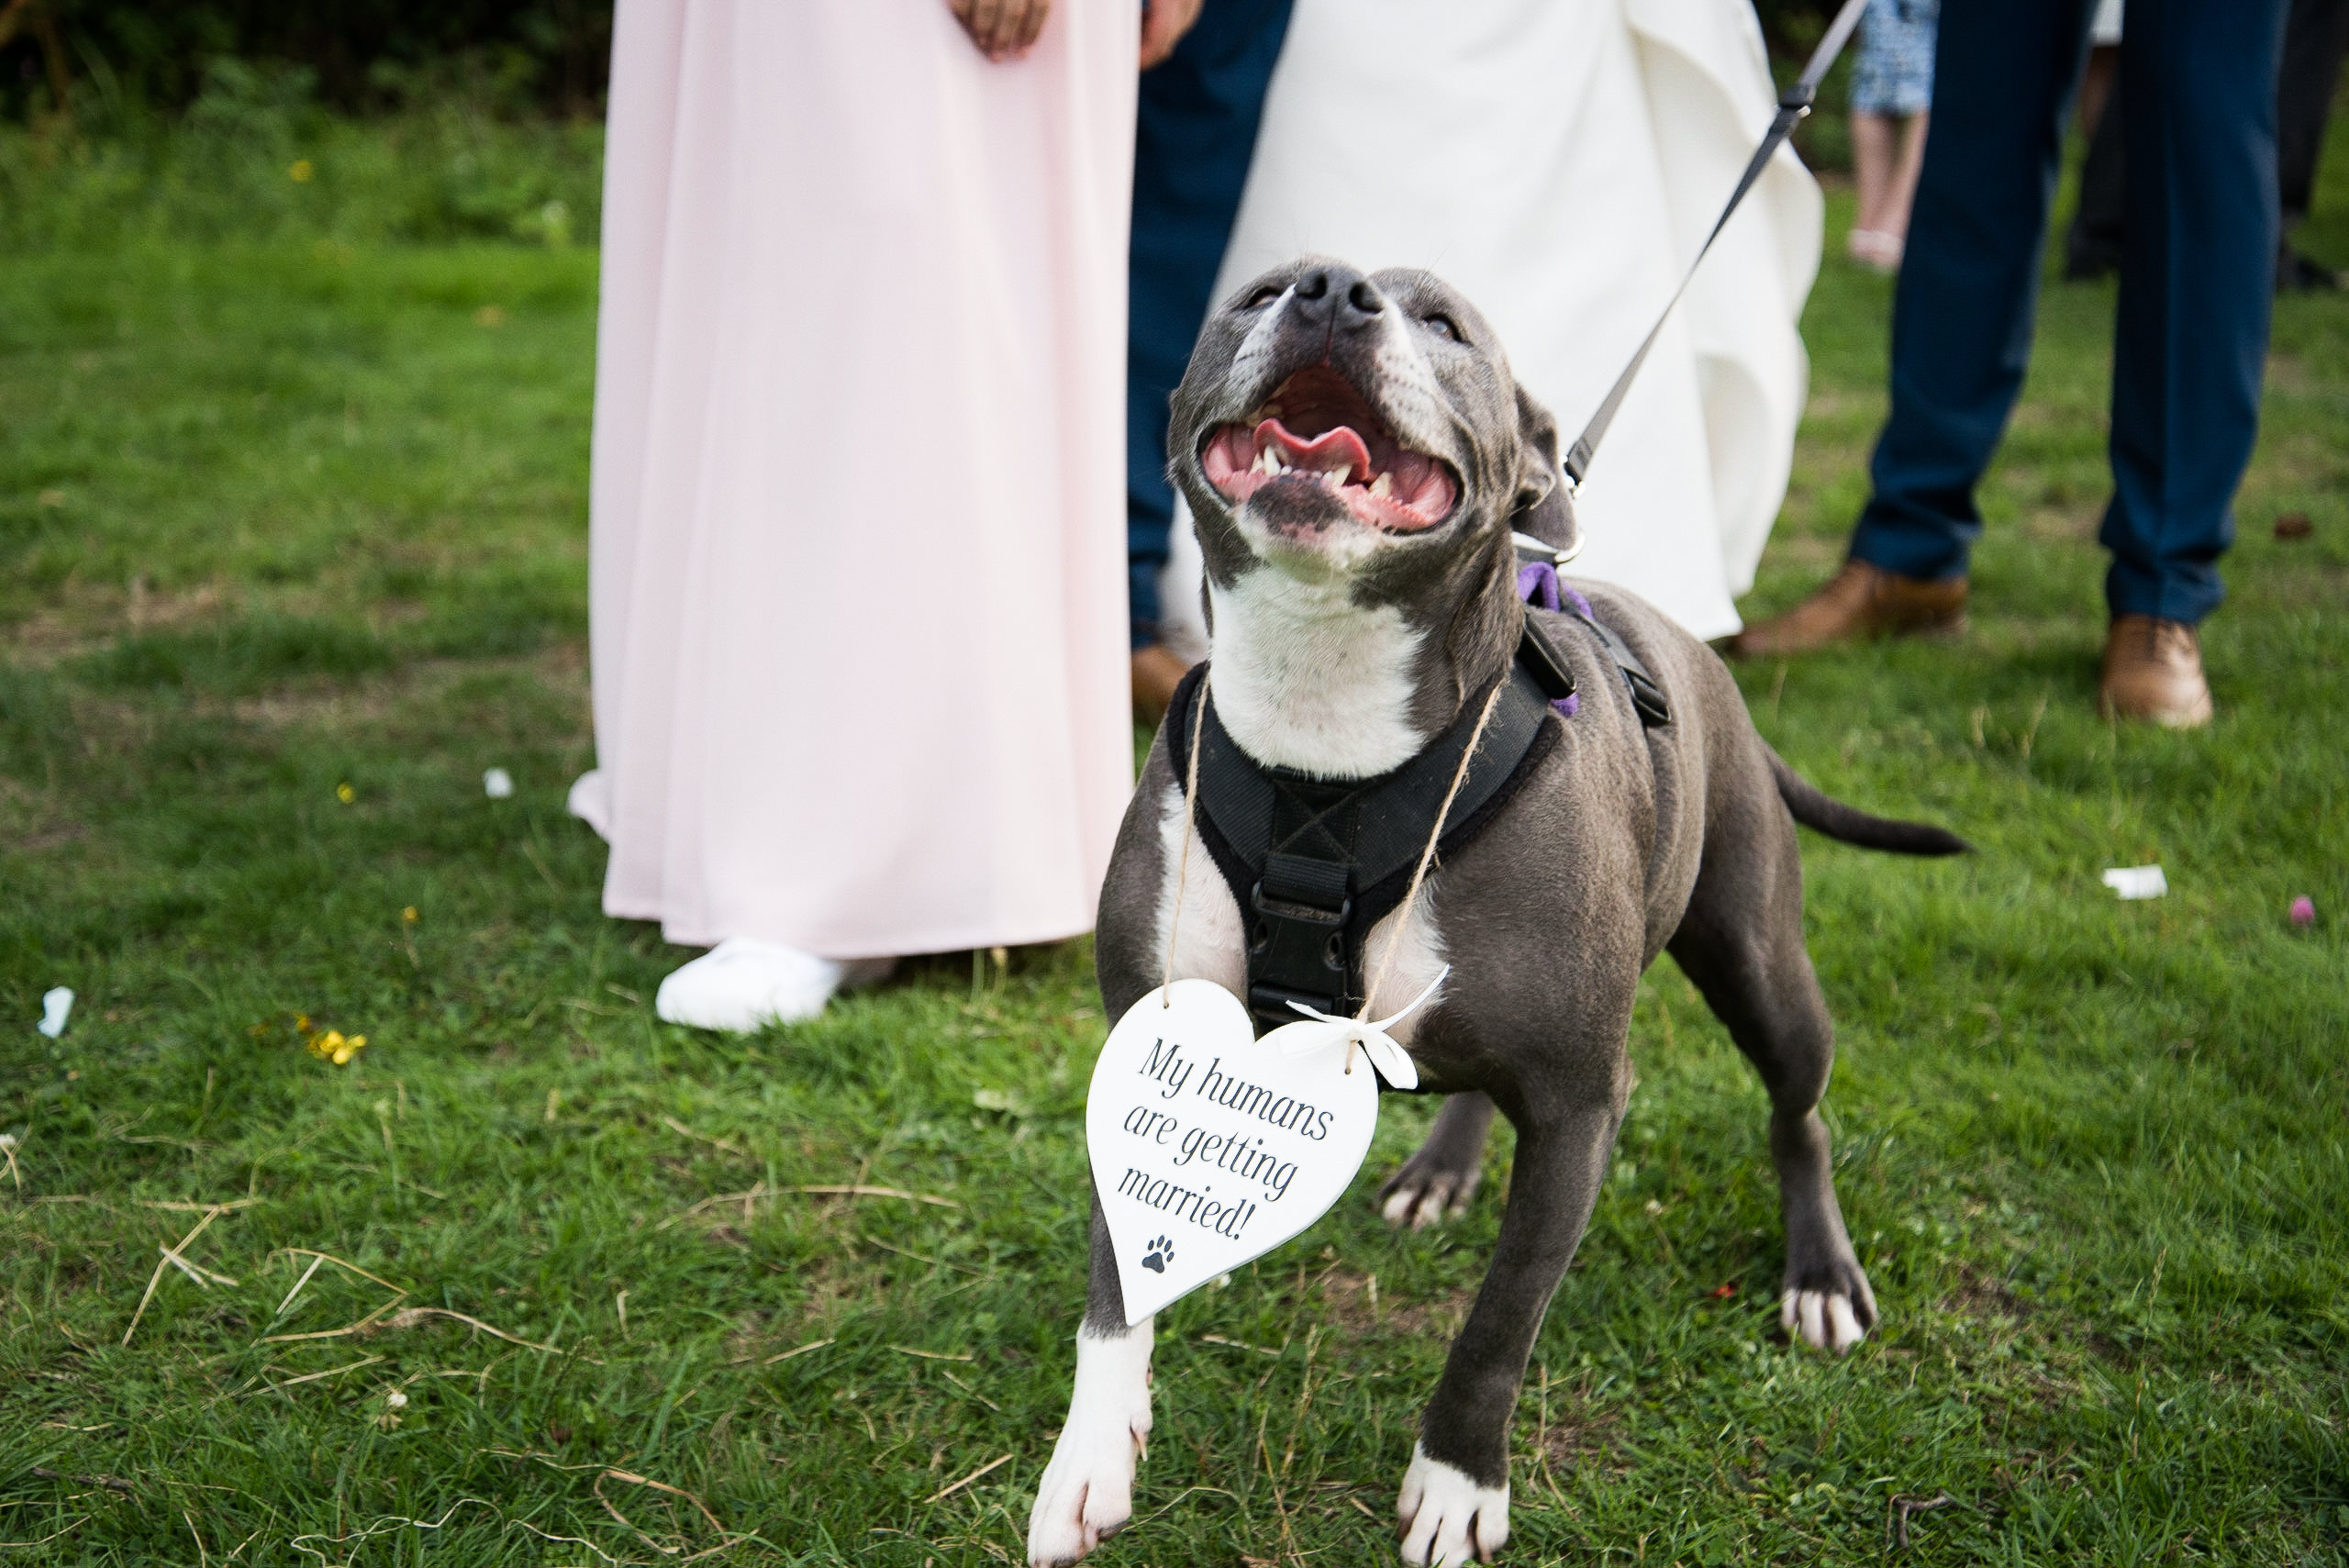 Love dogs at weddings